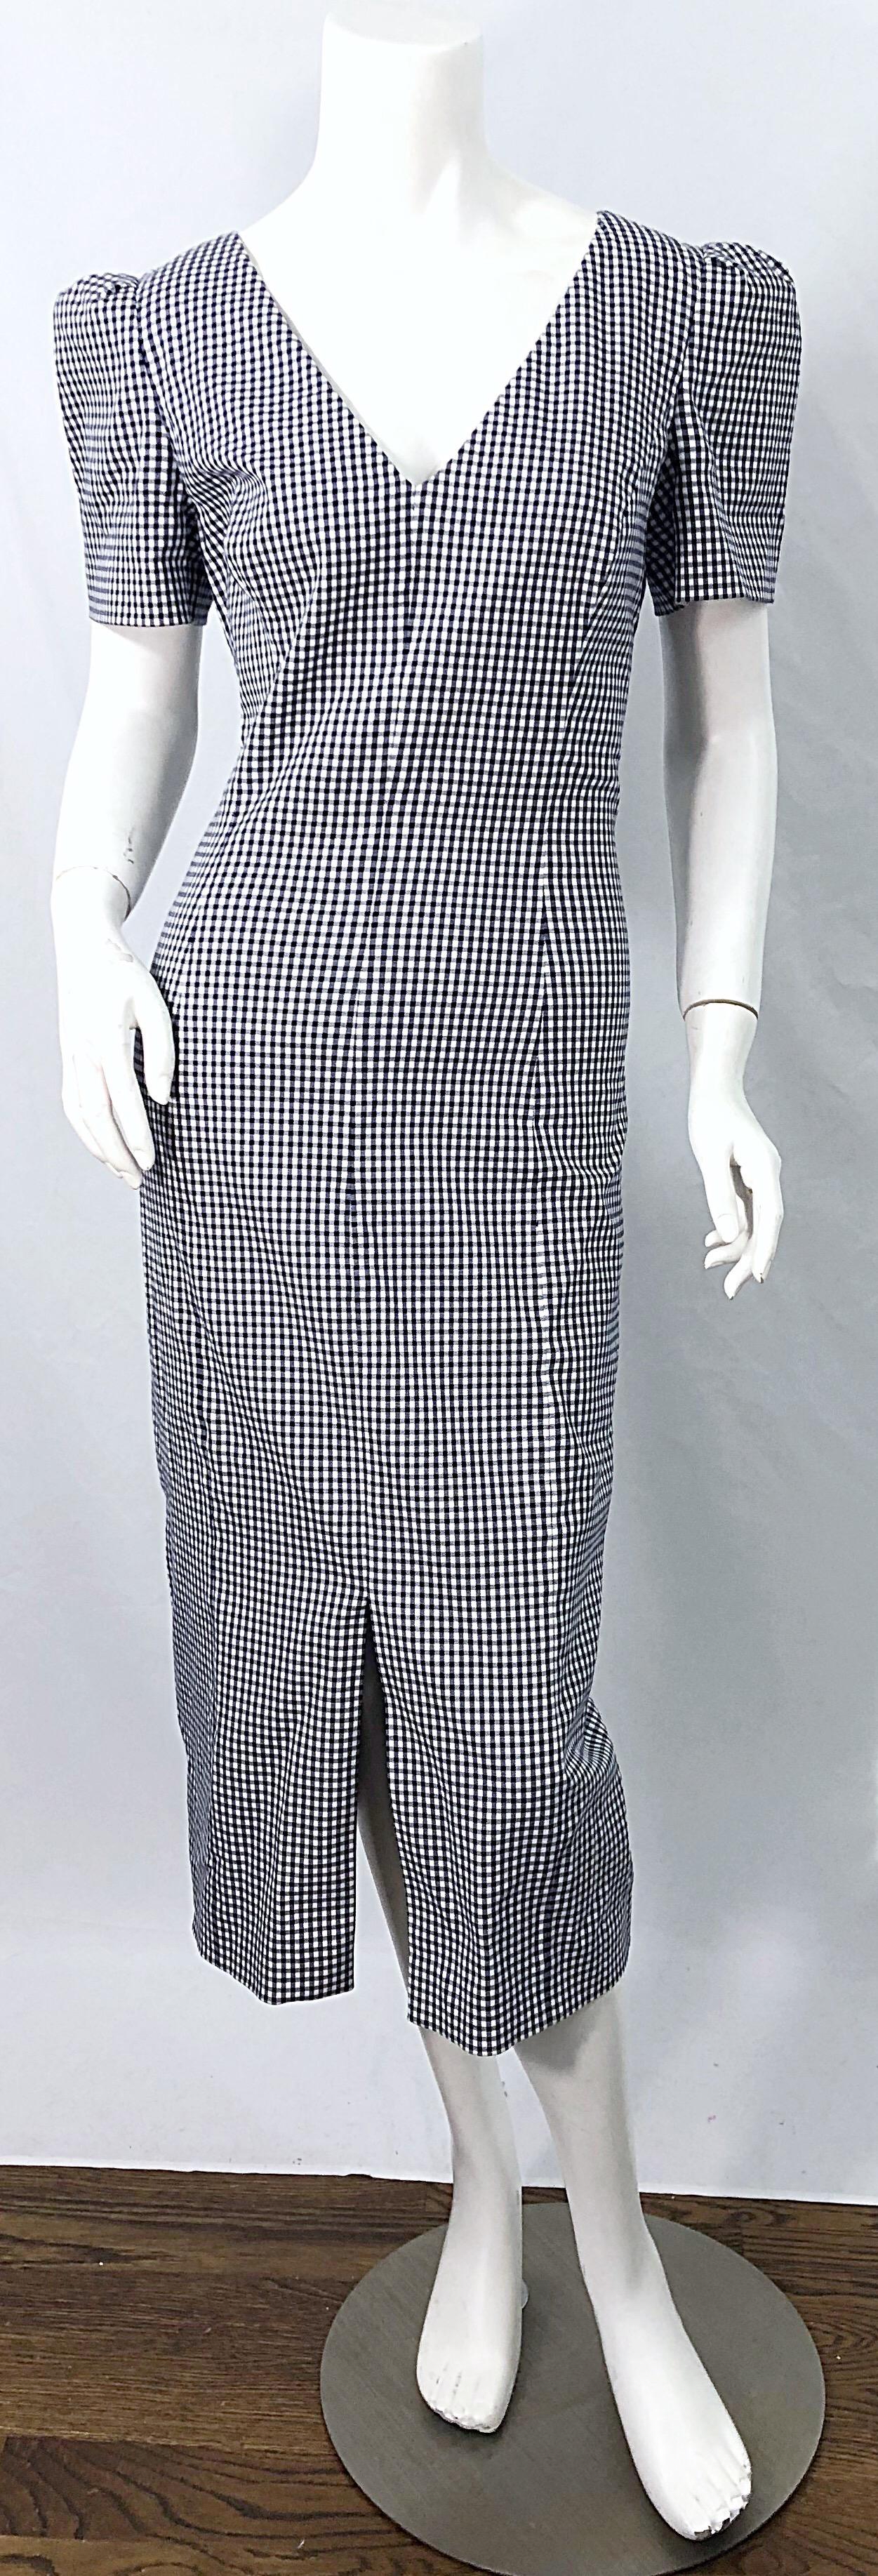 Chic MICHAEL KORS COLLECTION navy blue and white gingham checkered puff sleeve nautical dress ! 
98% Cotton 2% Spandex. 
Features allover navy blue and white gingham throughout the entire dress. Puff sleeves add just the right amount of volume.